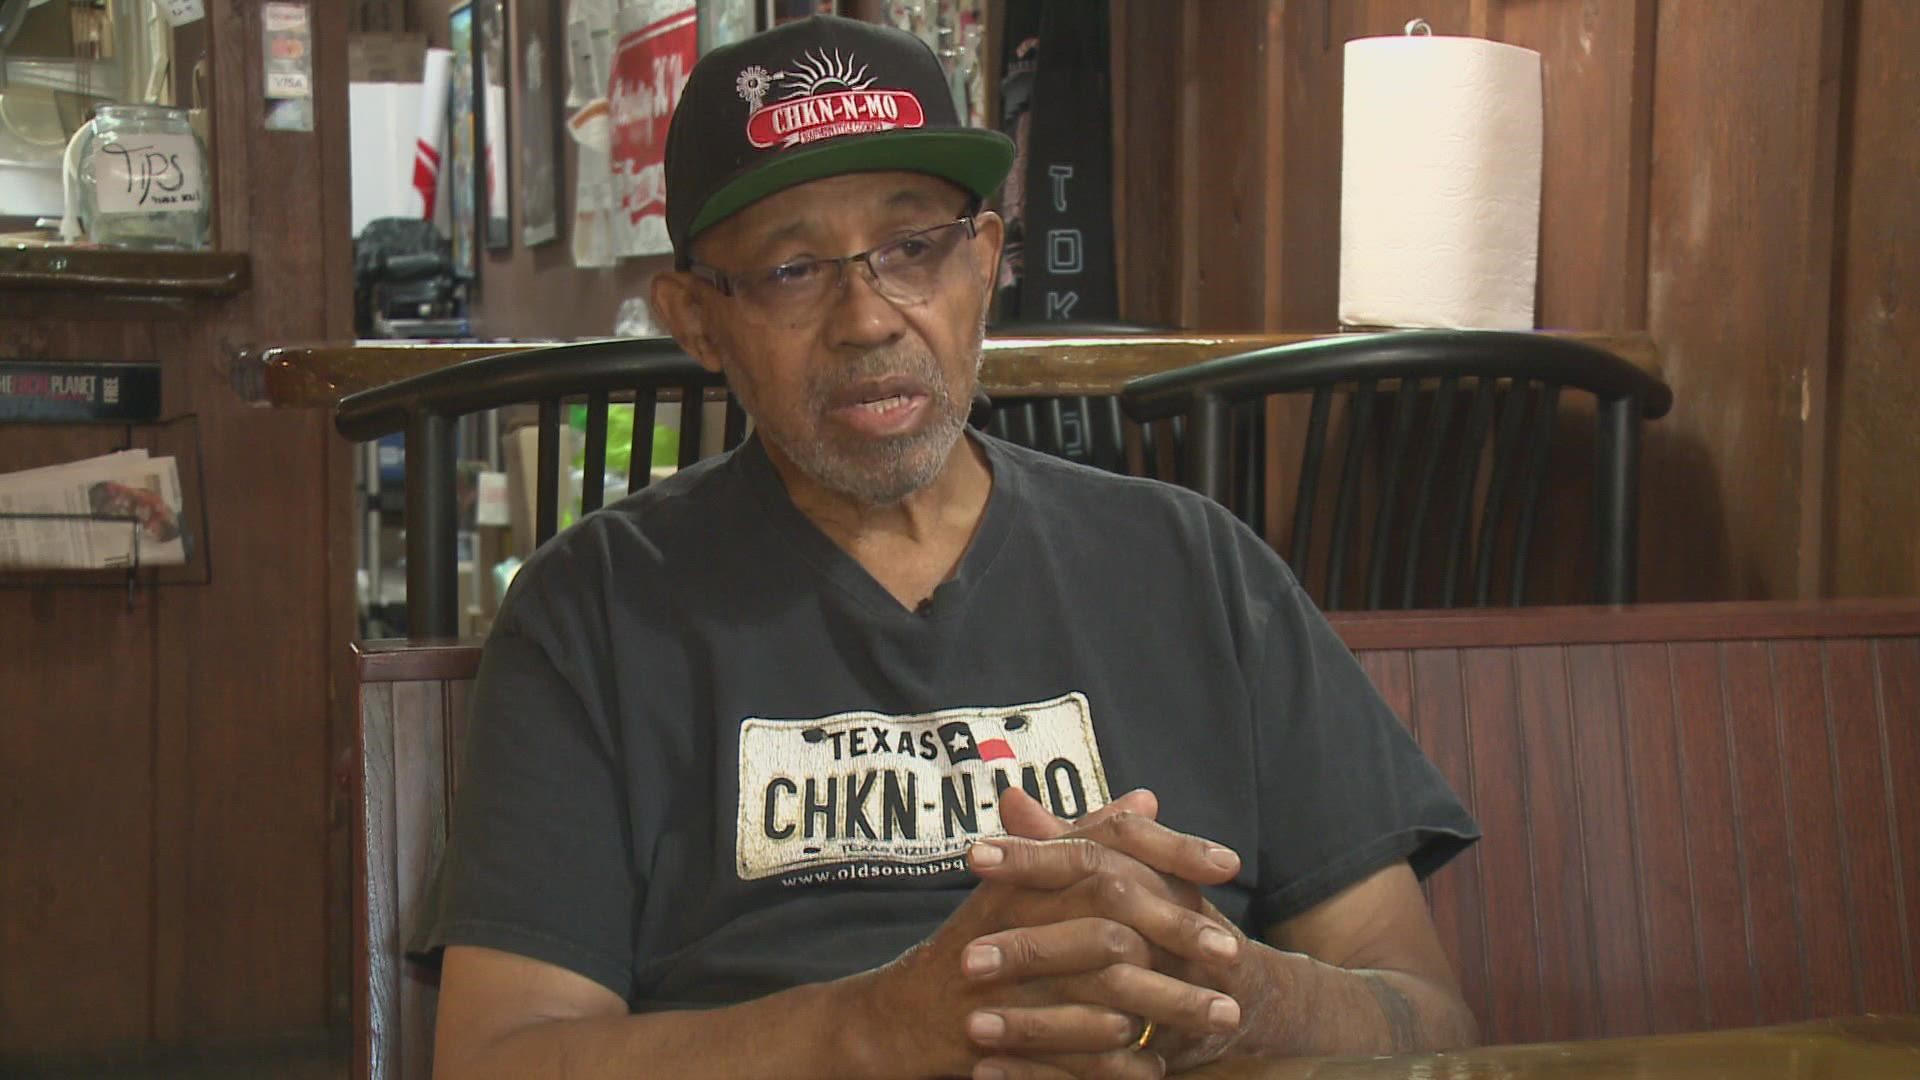 Bob Hemphill opened Chicken-N-Mo' in 1992 during Hoopfest weekend. They are now a Spokane staple, known for their southern cooking and hospitality.